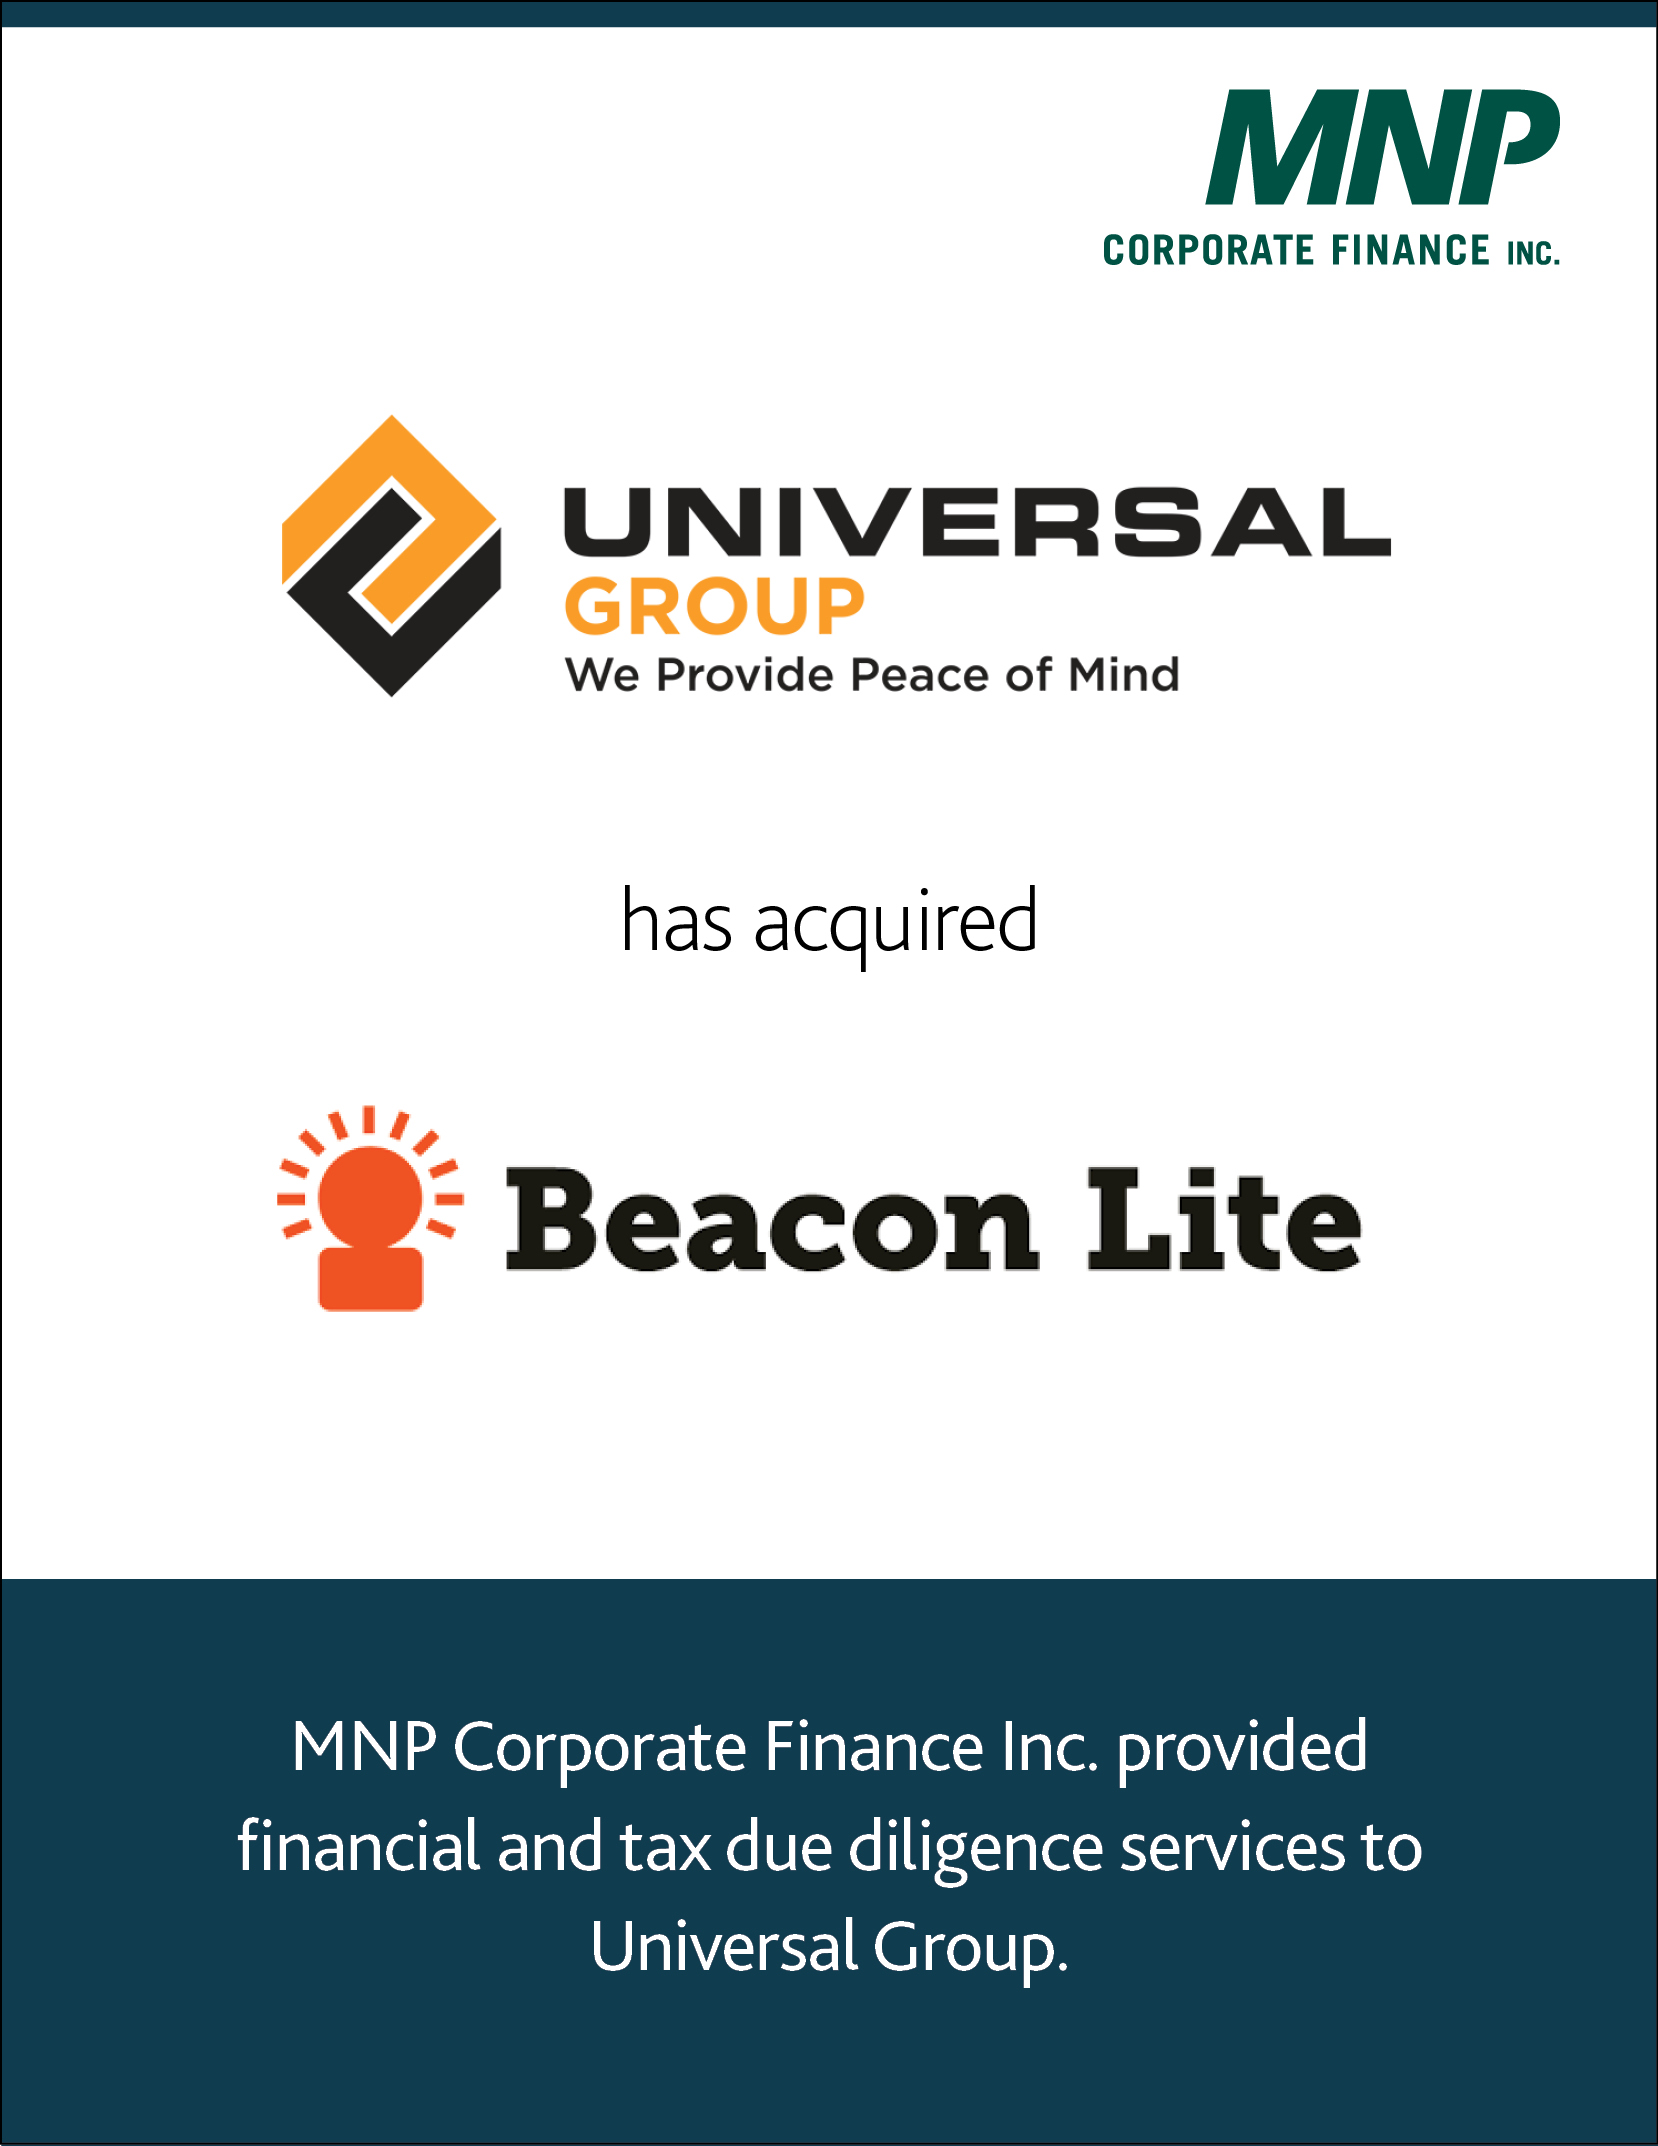 Universal Group has acquired Beacon Lite (Ottawa) Ltd. and Signebec